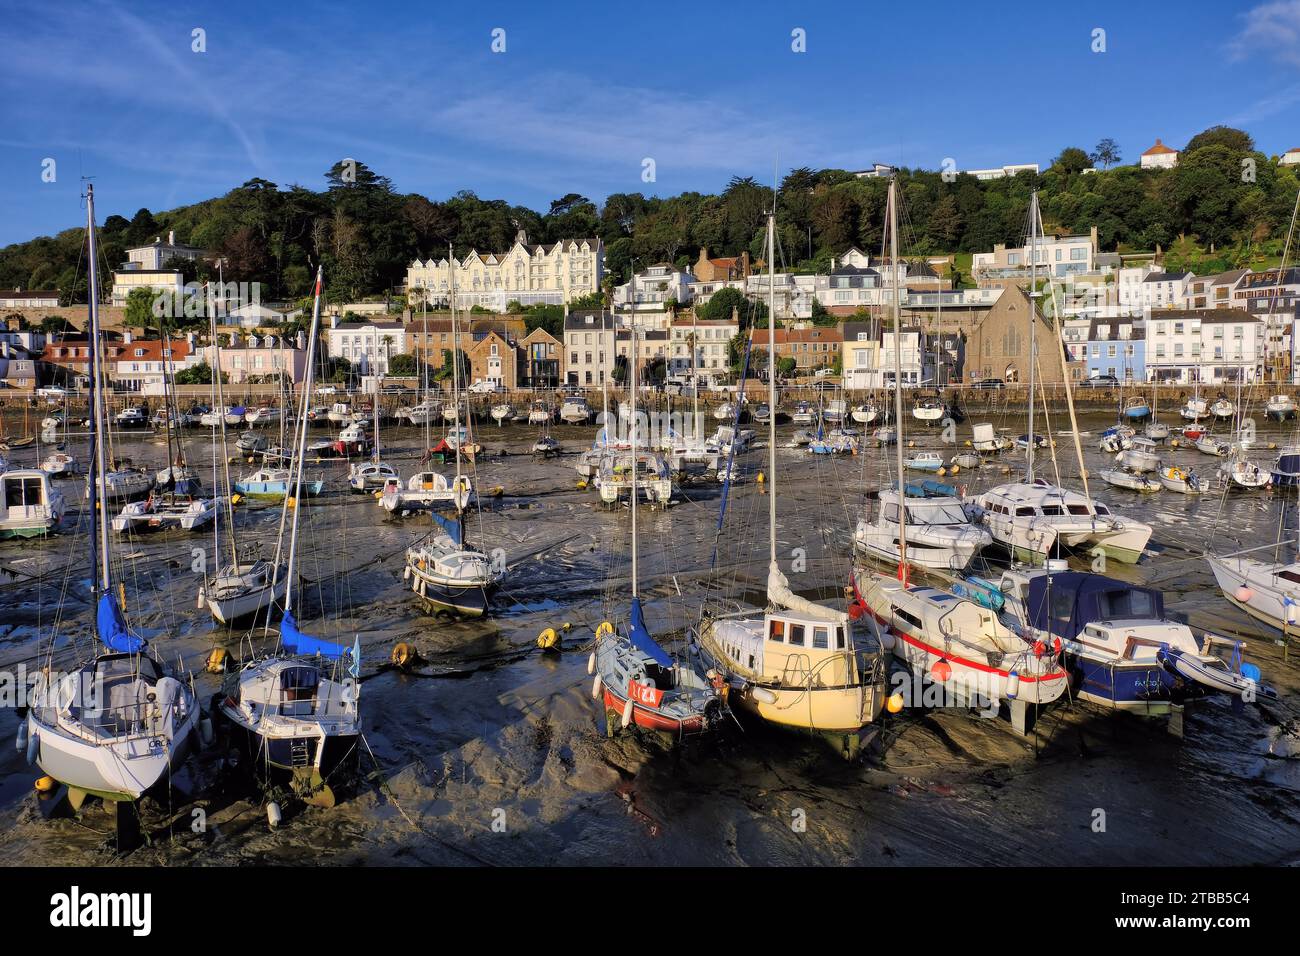 St Aubin: Yachts and boats moored in harbour, with church and Somerville Hotel in St Aubin, Channel Islands, UK Stock Photo